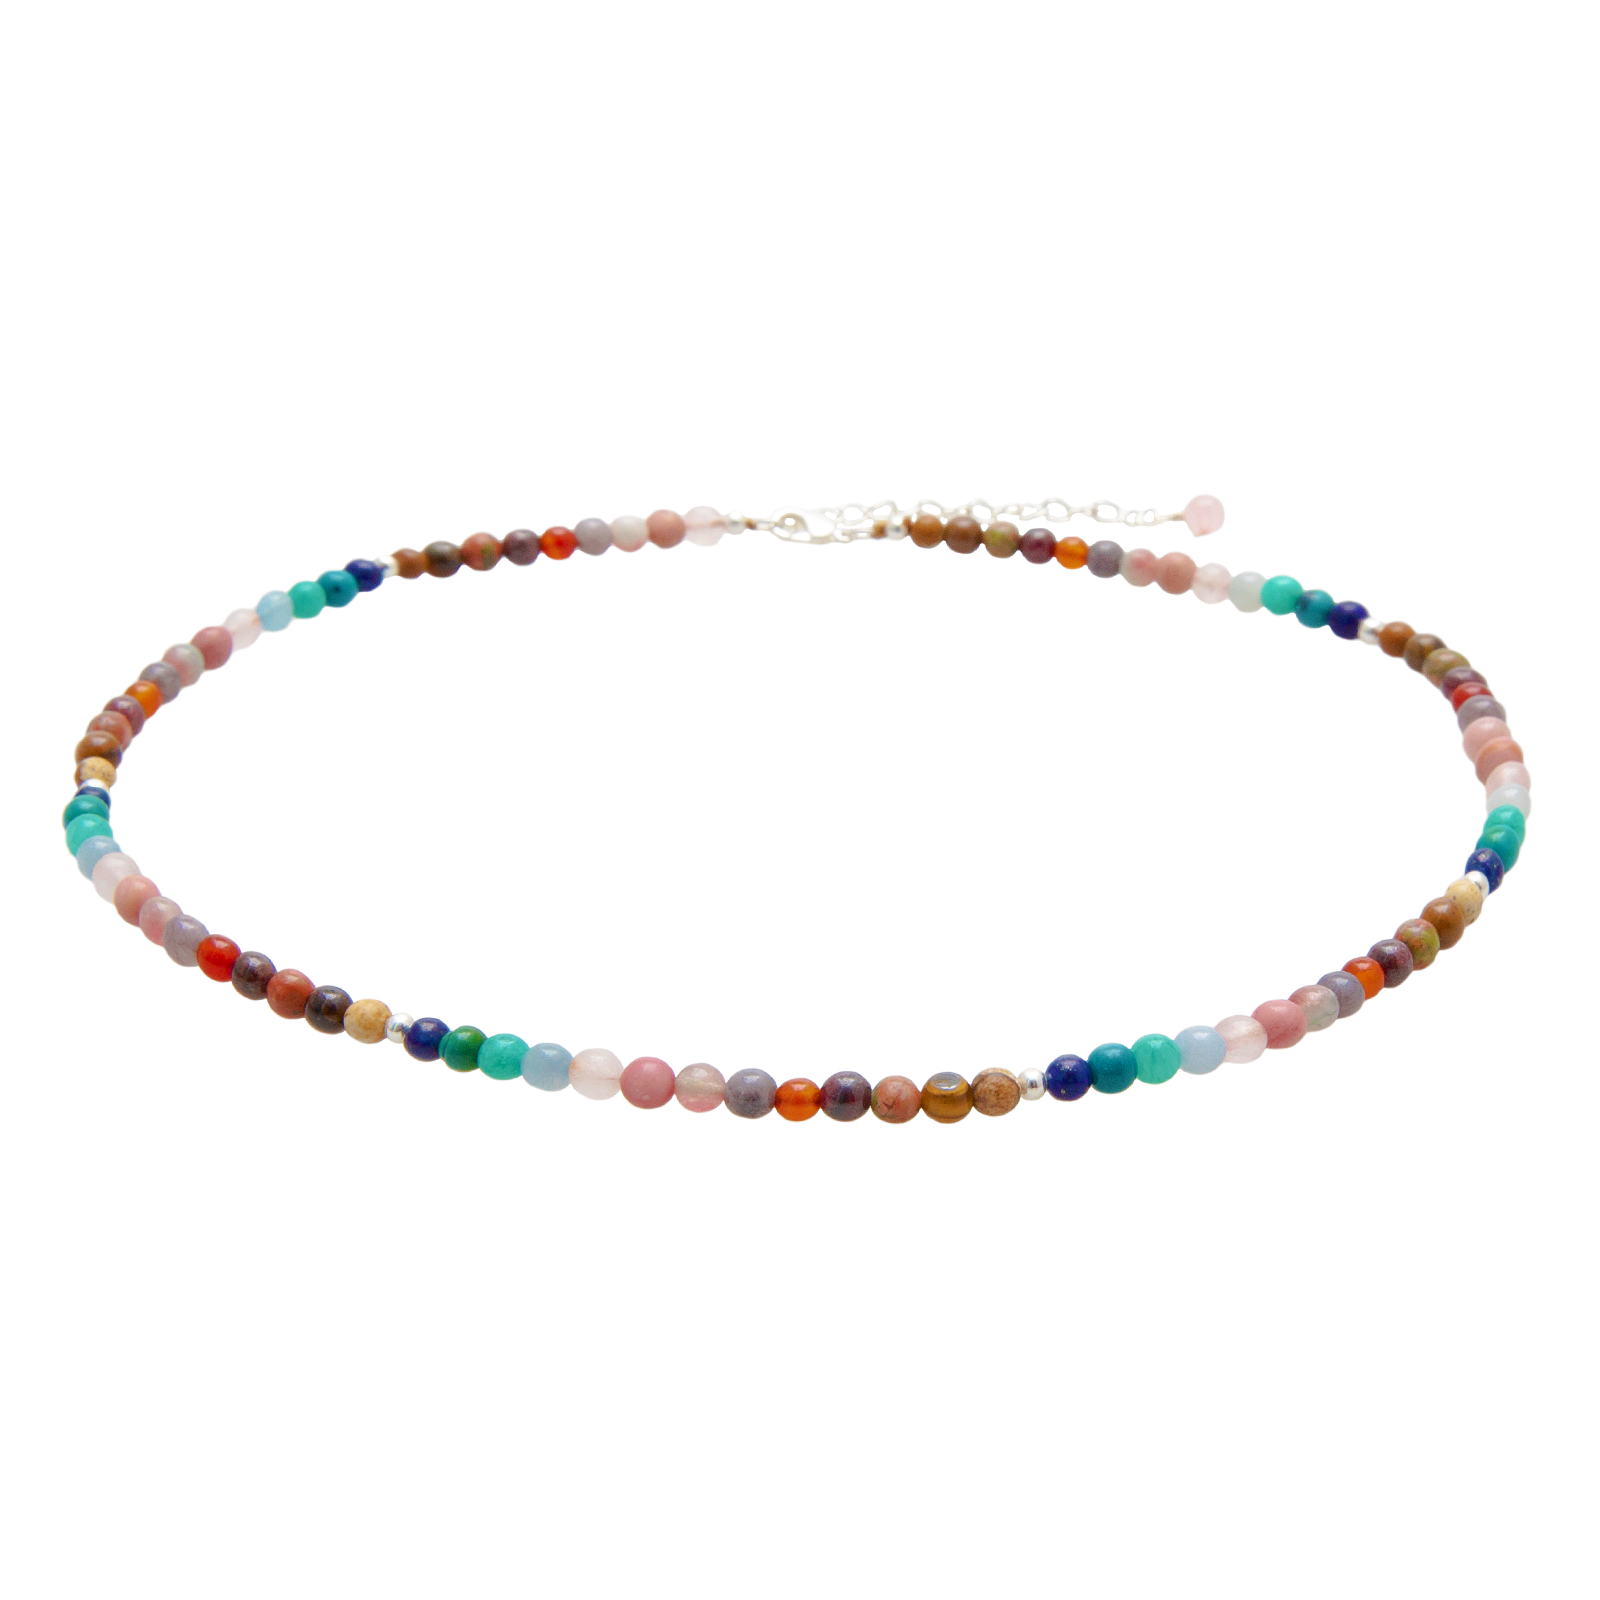 4mm multicolor stone necklace with gold chain